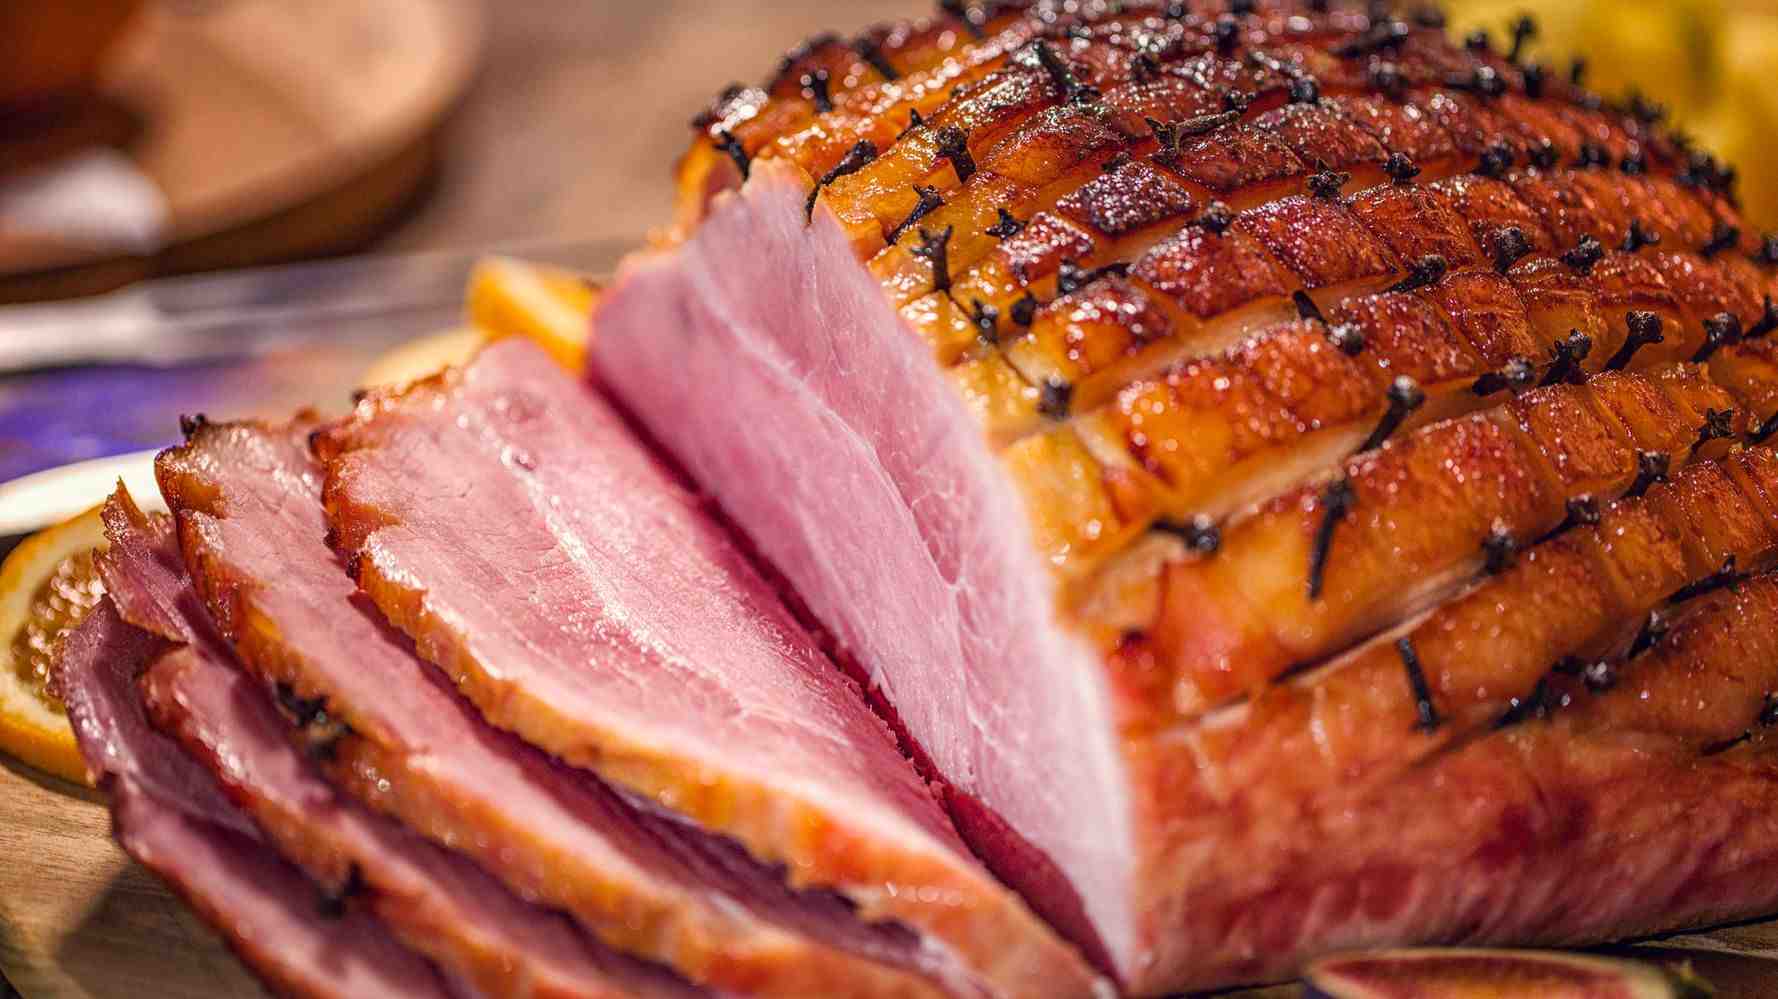 What is raw ham called?